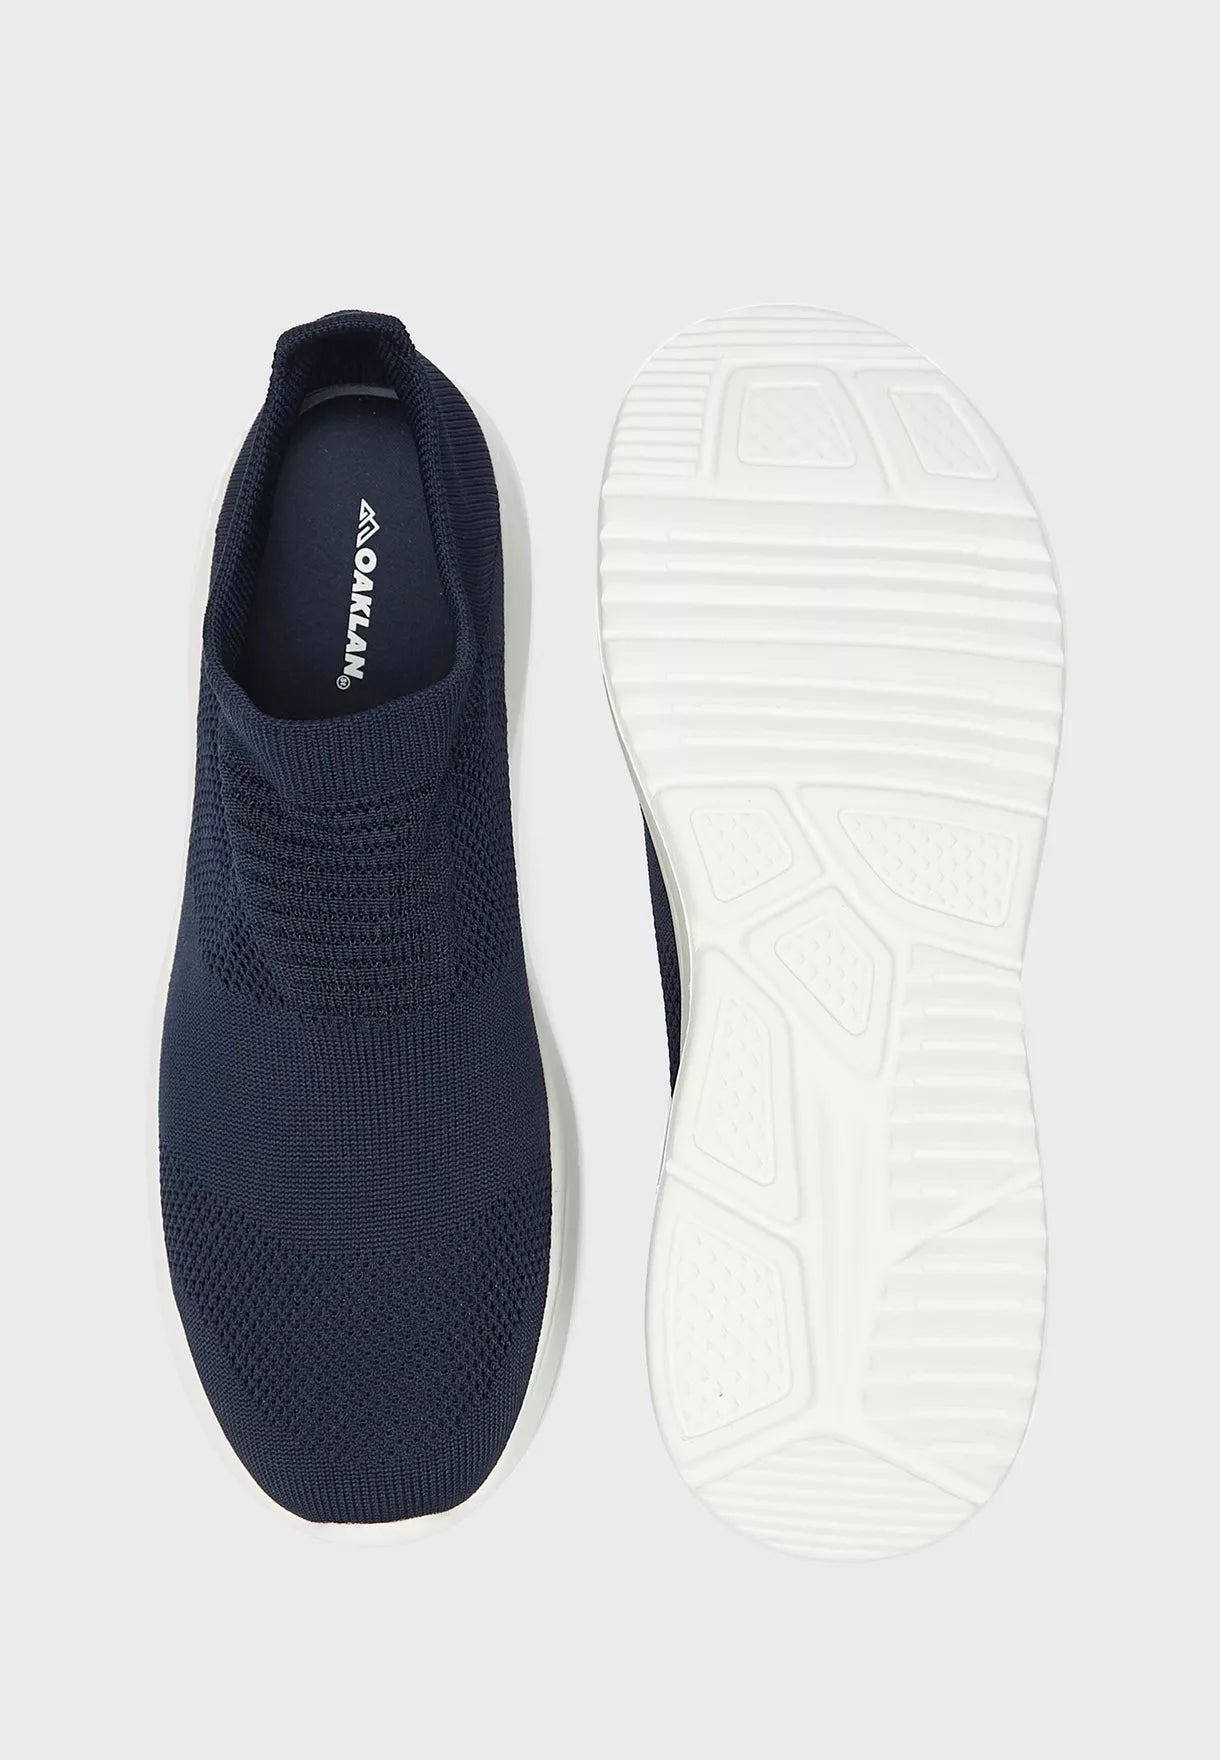 Casual Slip Ons Loafers